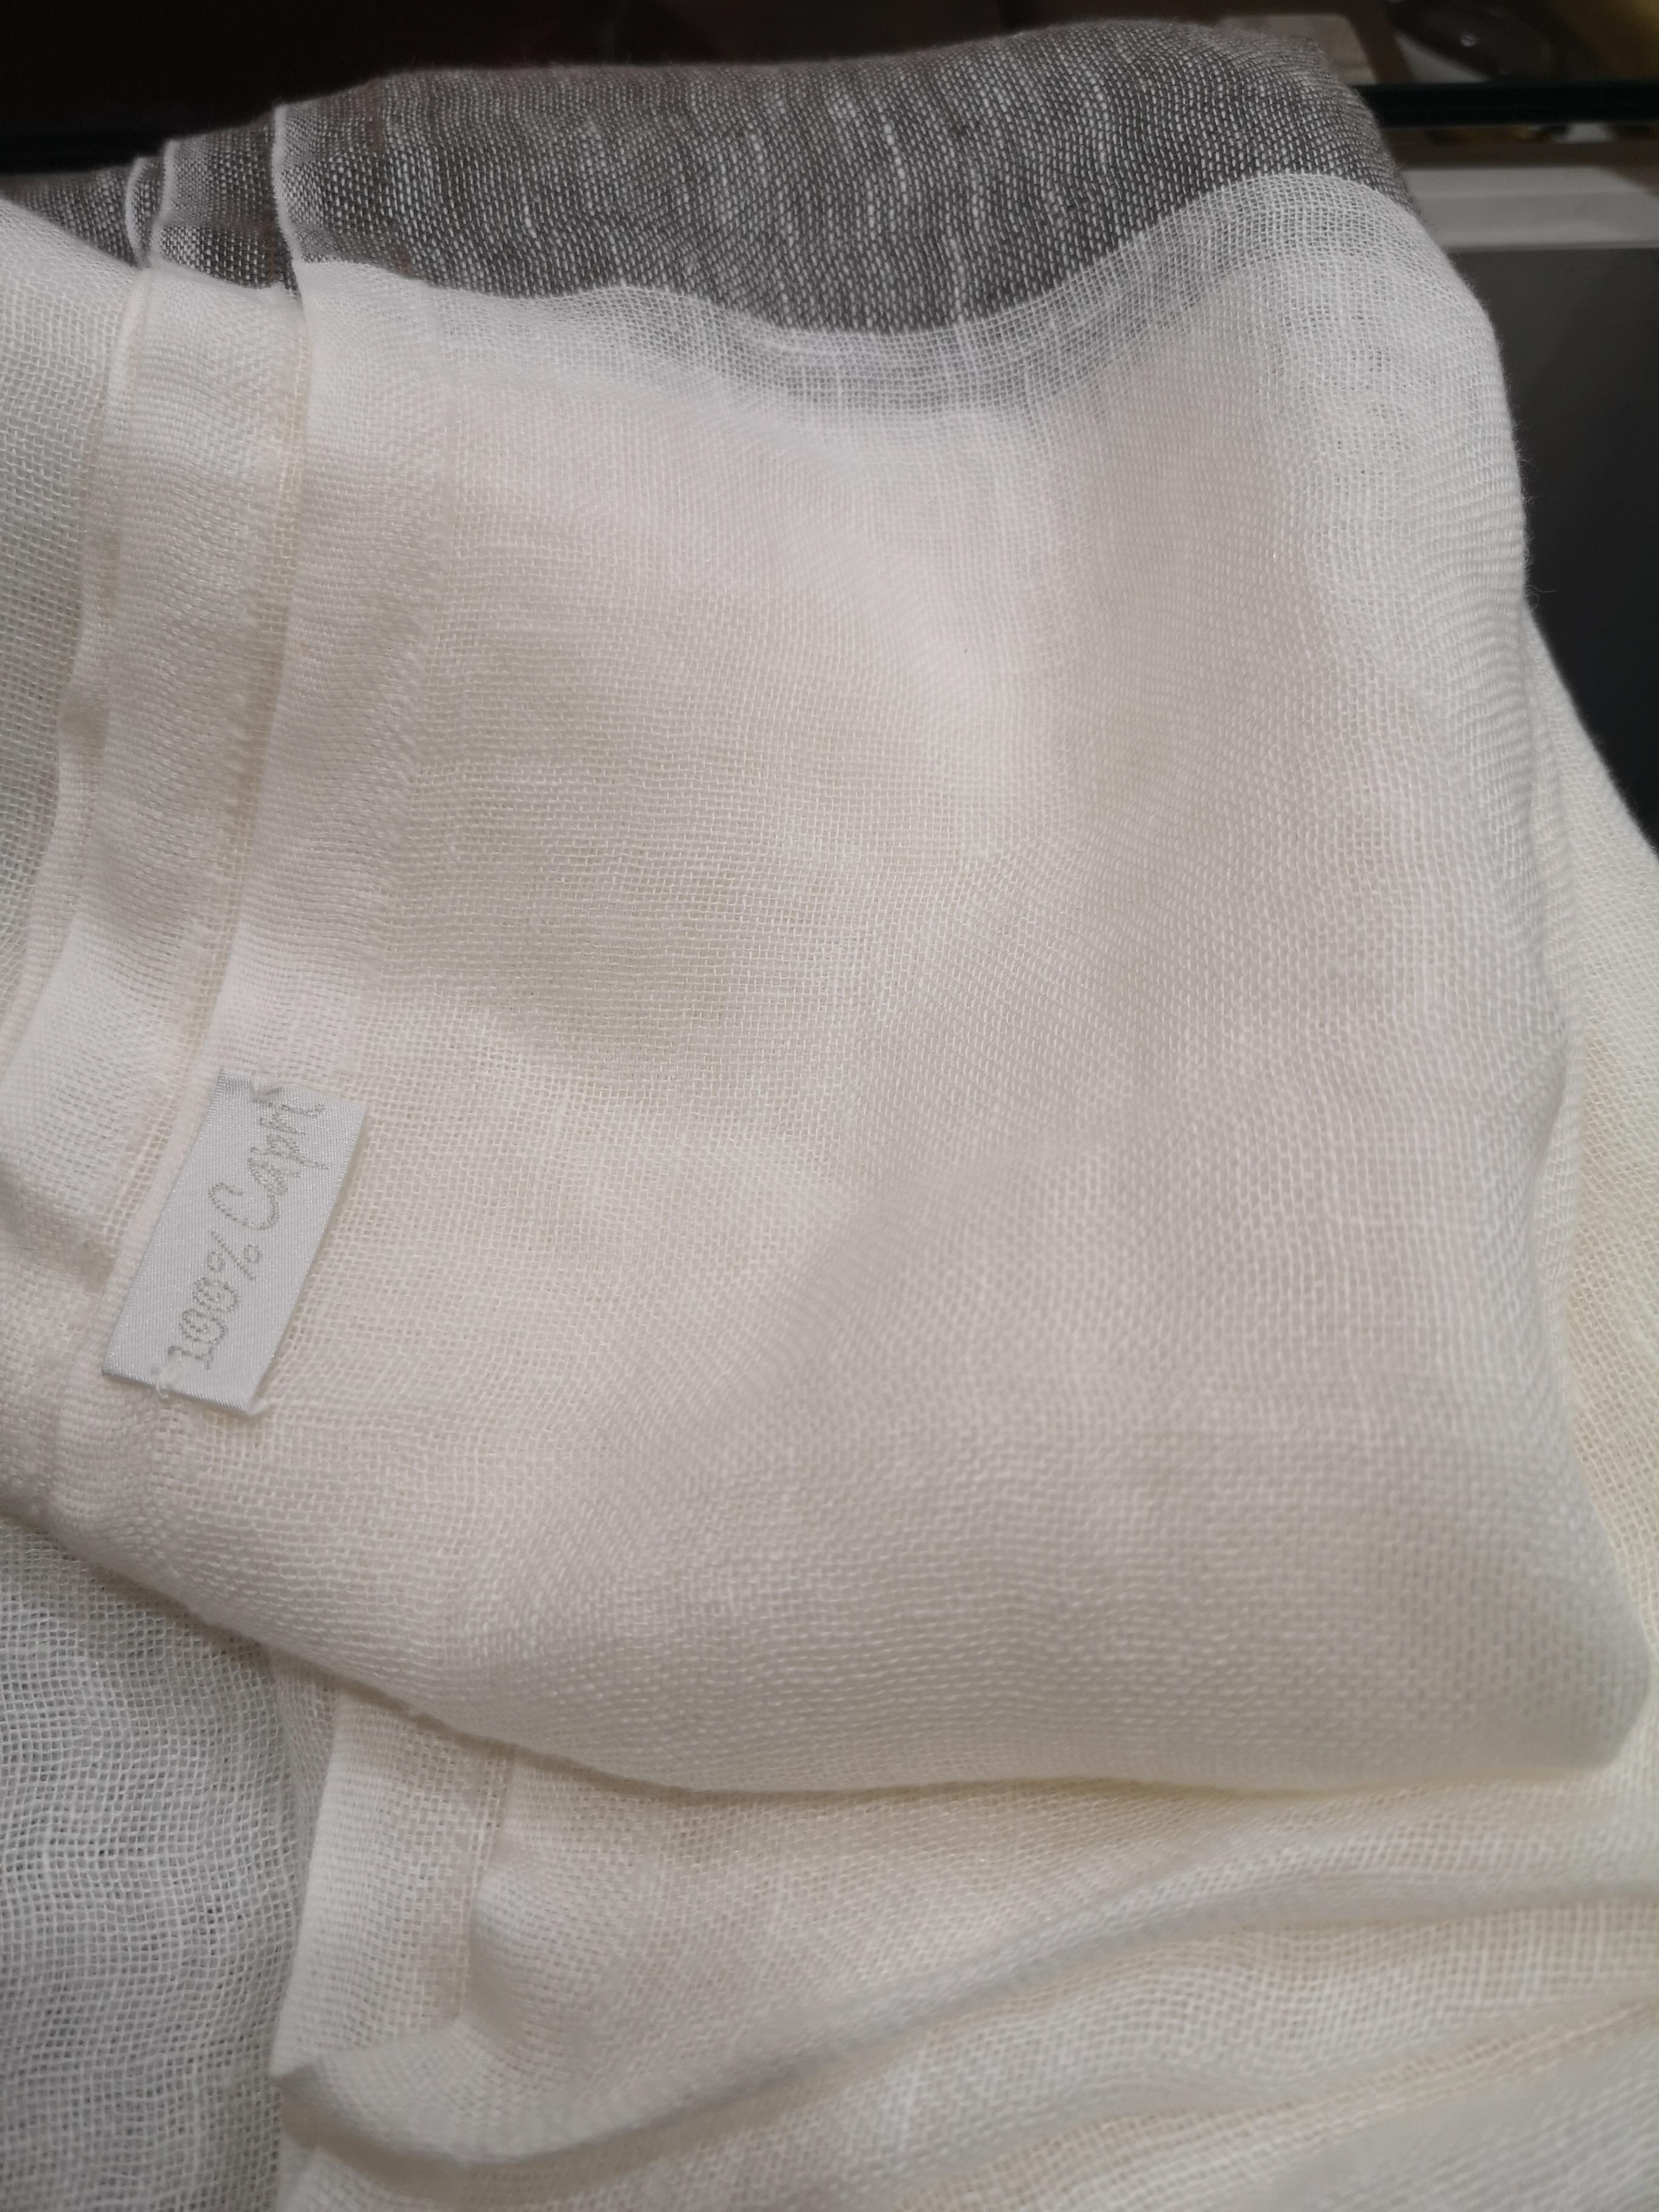 Vintage white and grey linen scarf - foulard
White and linen scarf totally made in italy